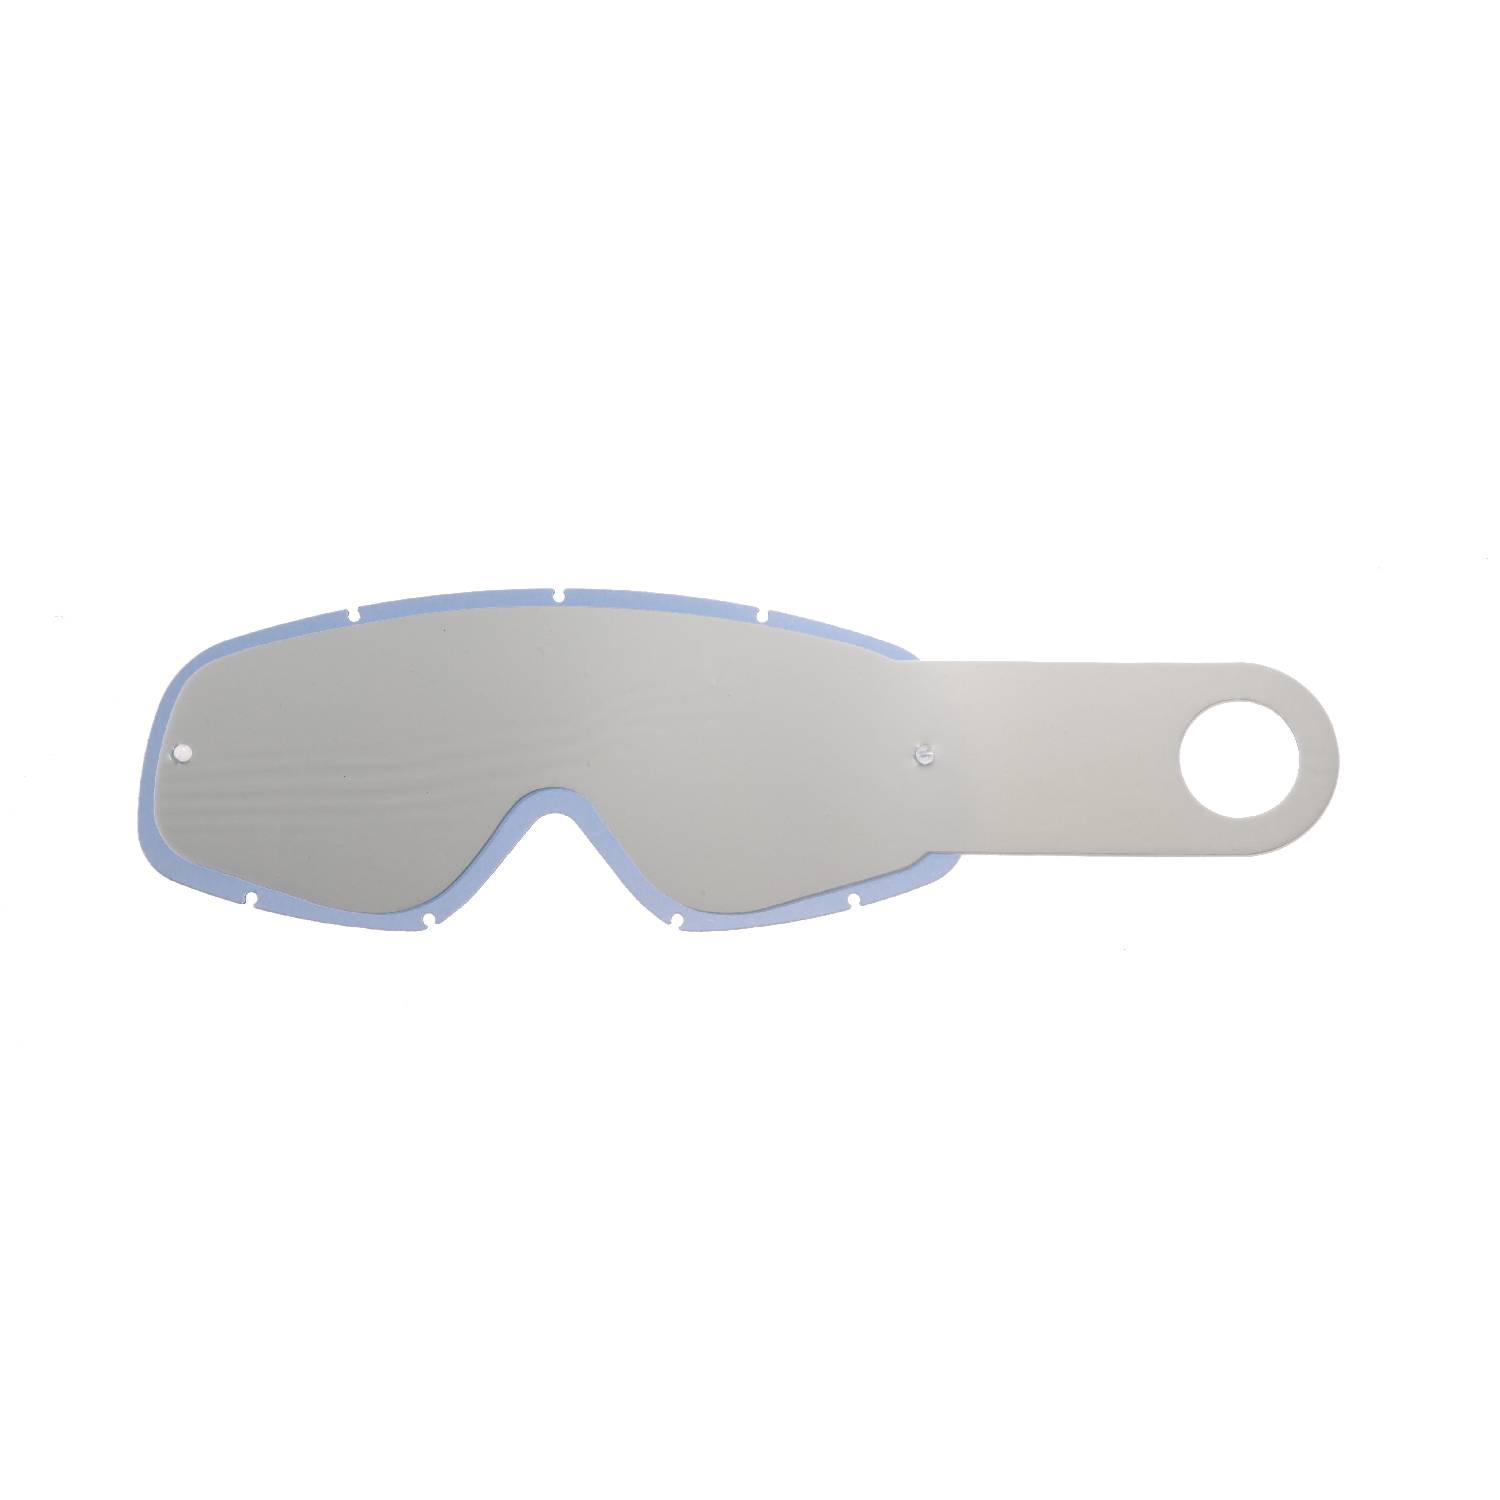 Smoke lens + 10 Tear-OFFS (combo) compatible for Oakley O-frame goggle